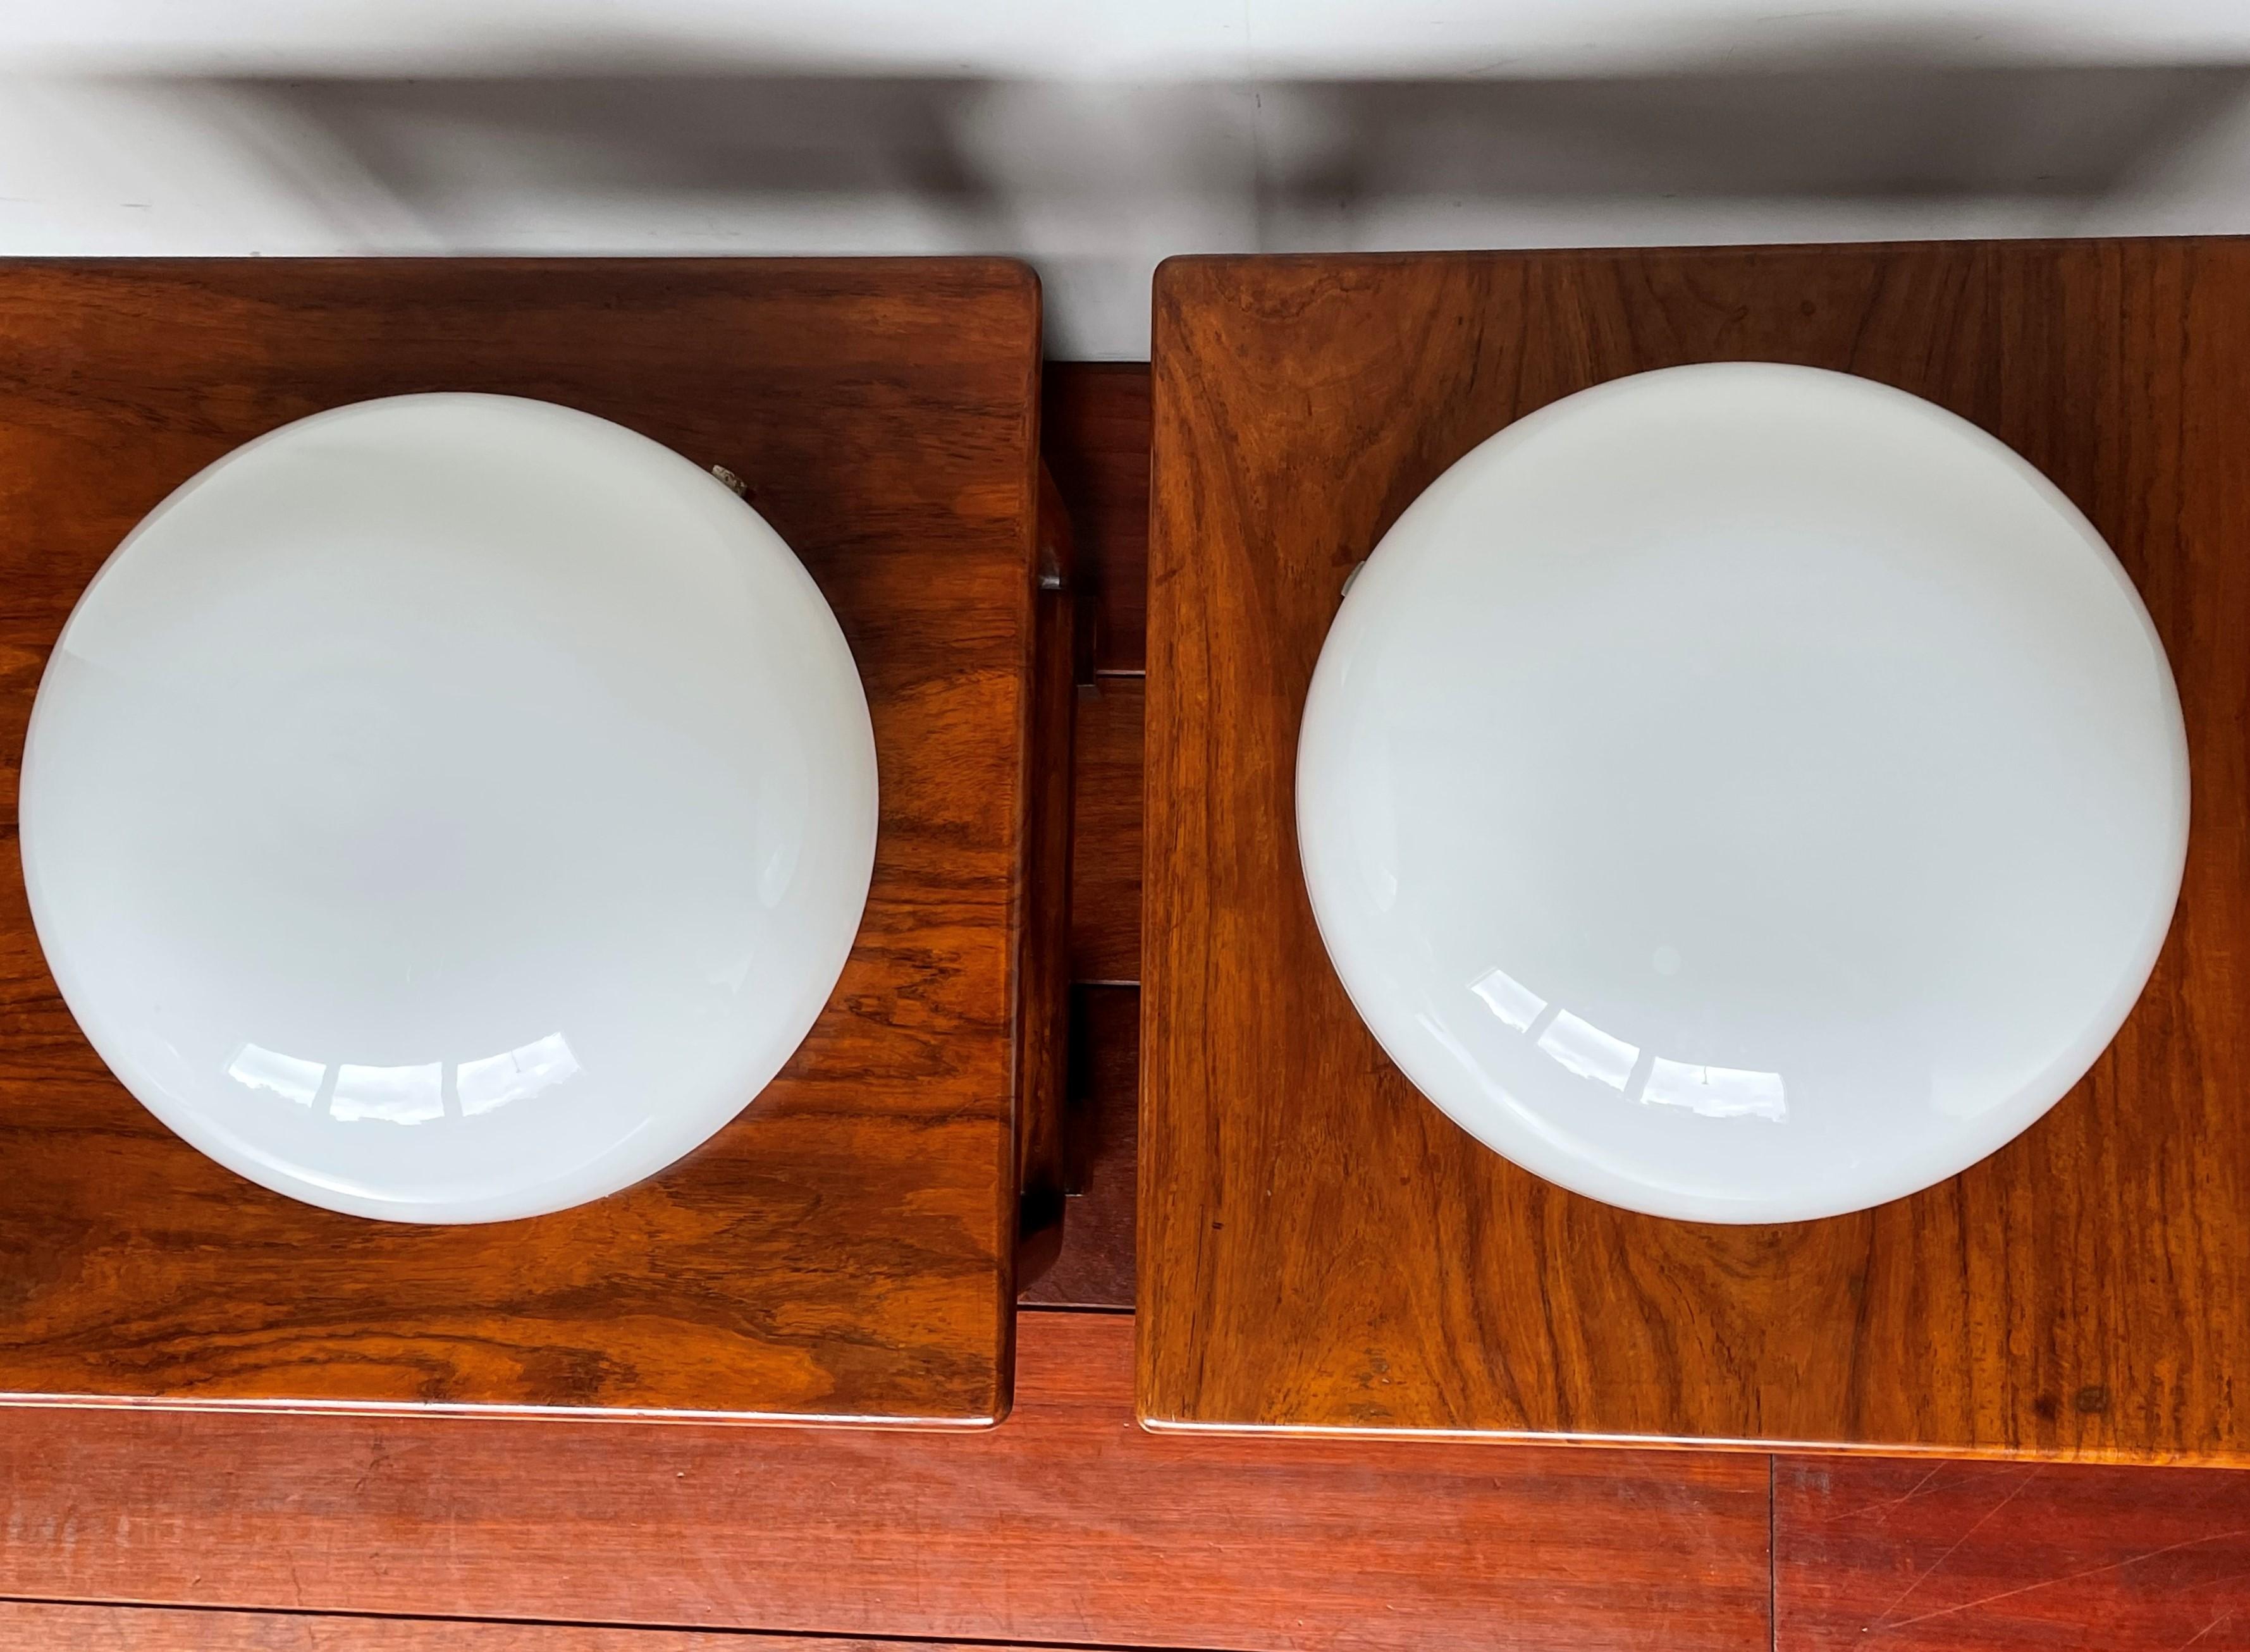 Very cool looking and timeless pair of European flushmounts from 1950-1960.

These mid-century opaline glass flush mounts have a very pleasing to the eye design and their timelessness make them suitable for other kinds of interiors as well. The